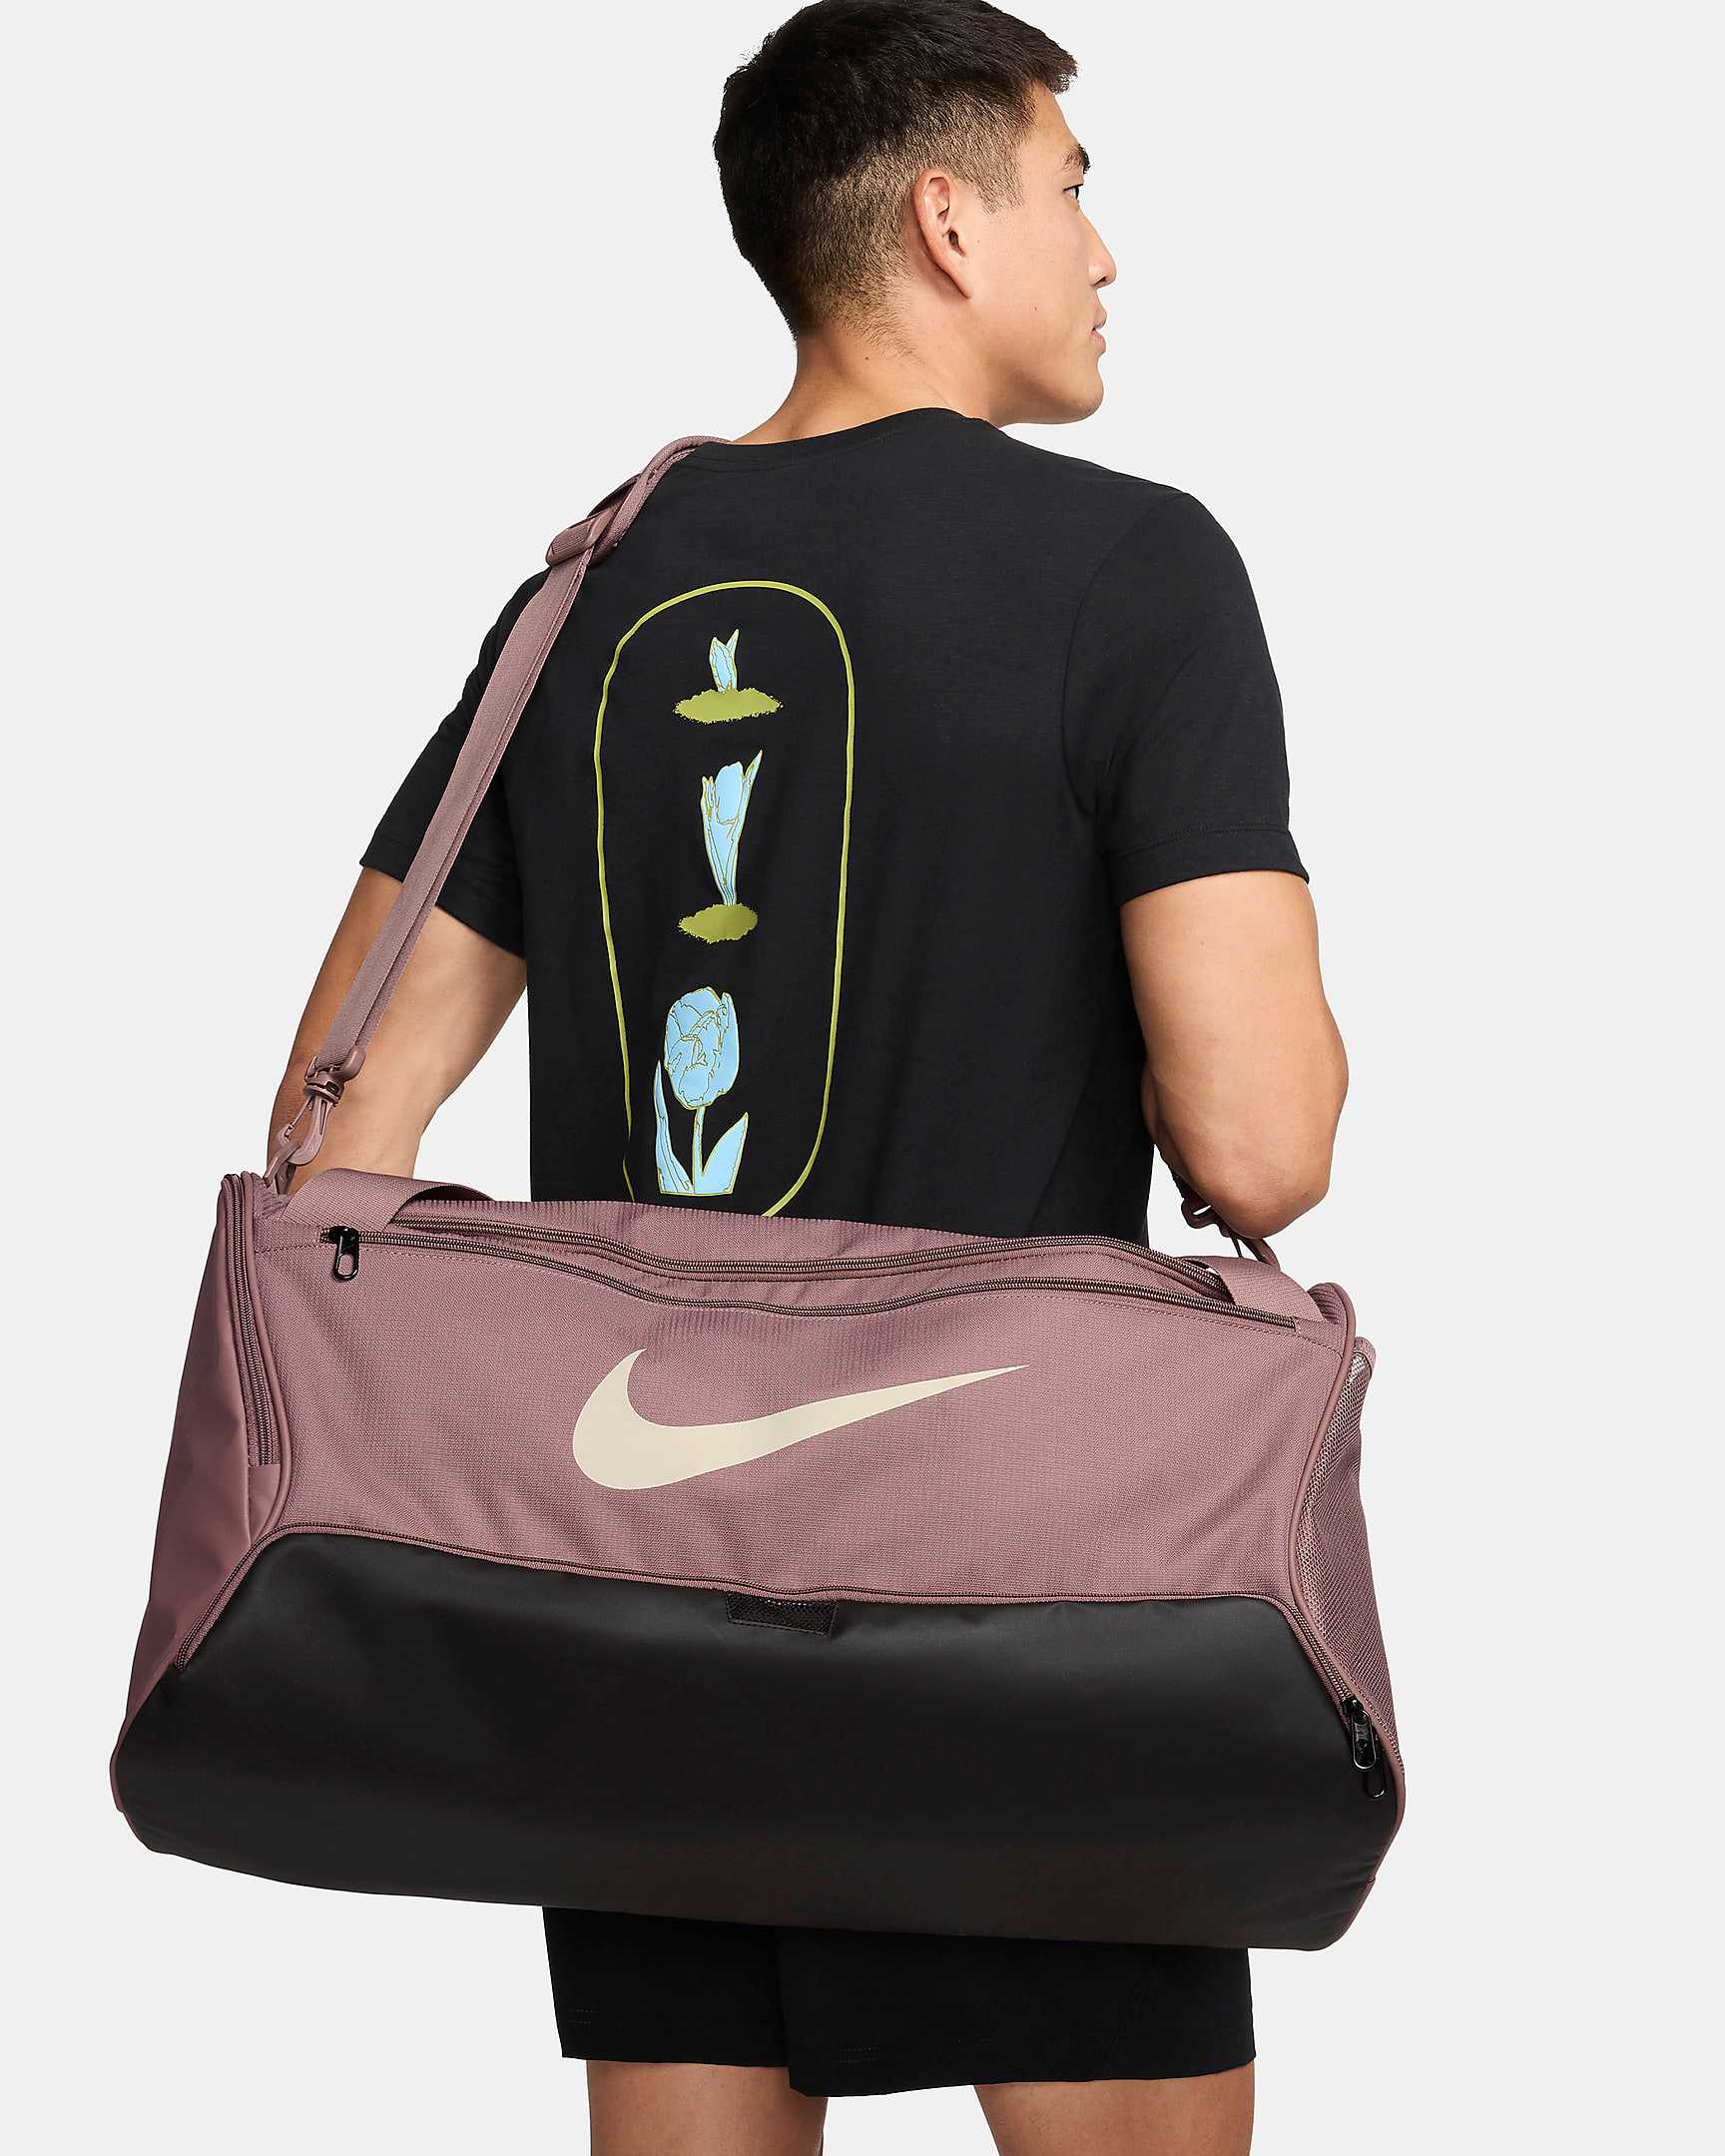 The Best Gym Bags for Carrying Fitness Gear With Ease